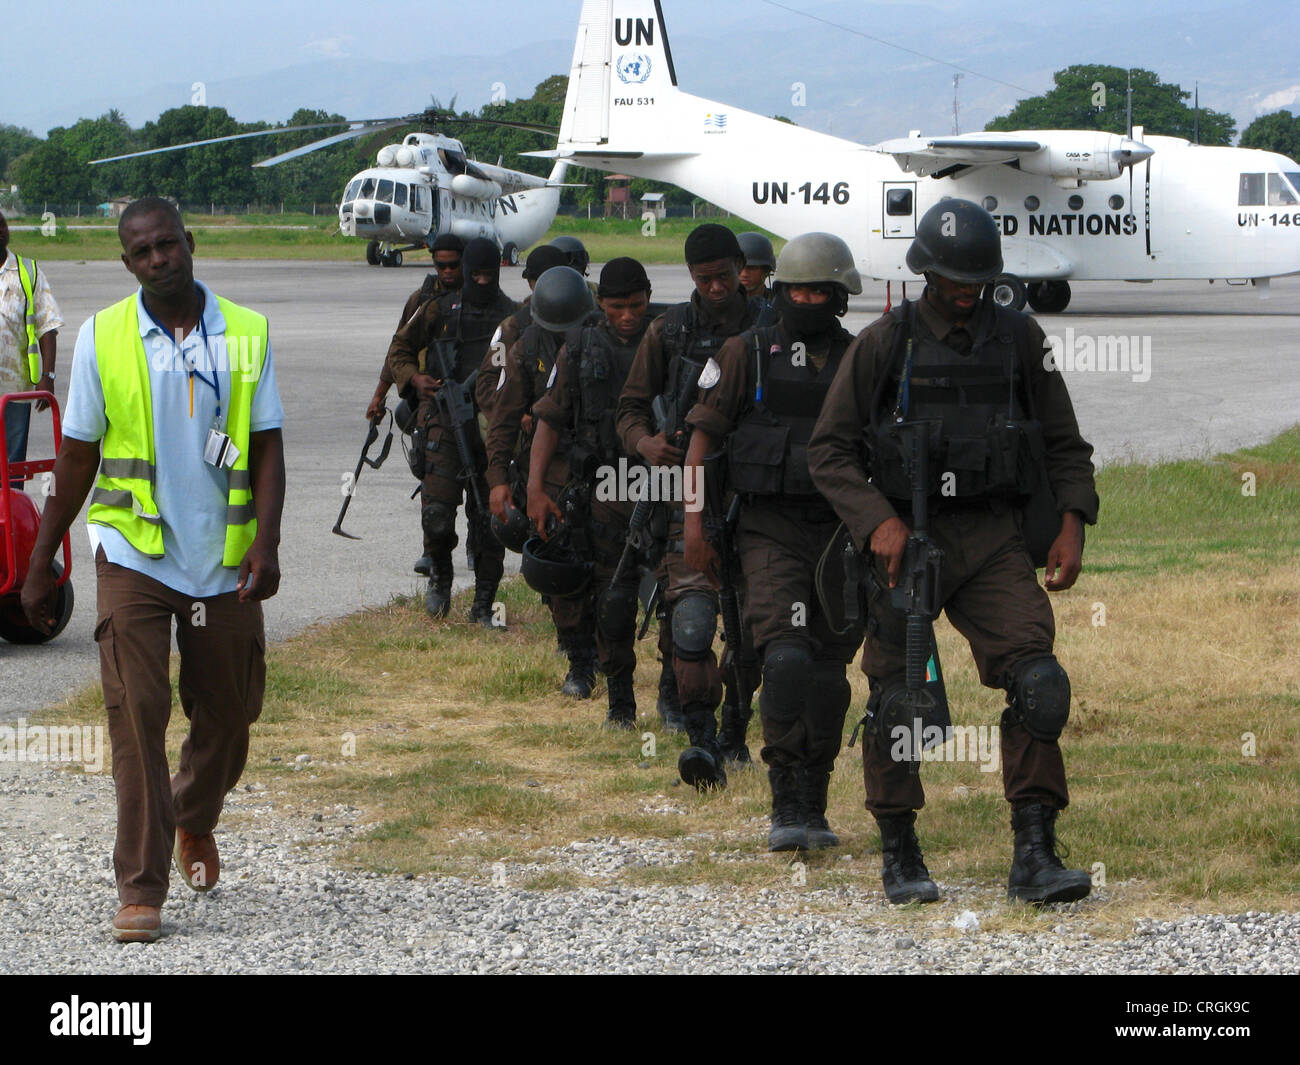 soldiers at airport, aircraft and helicopter of the 'United Nations Stabilisation Mission in Haiti' in the background, Haiti, Provine de l'Ouest, Port-Au-Prince Stock Photo